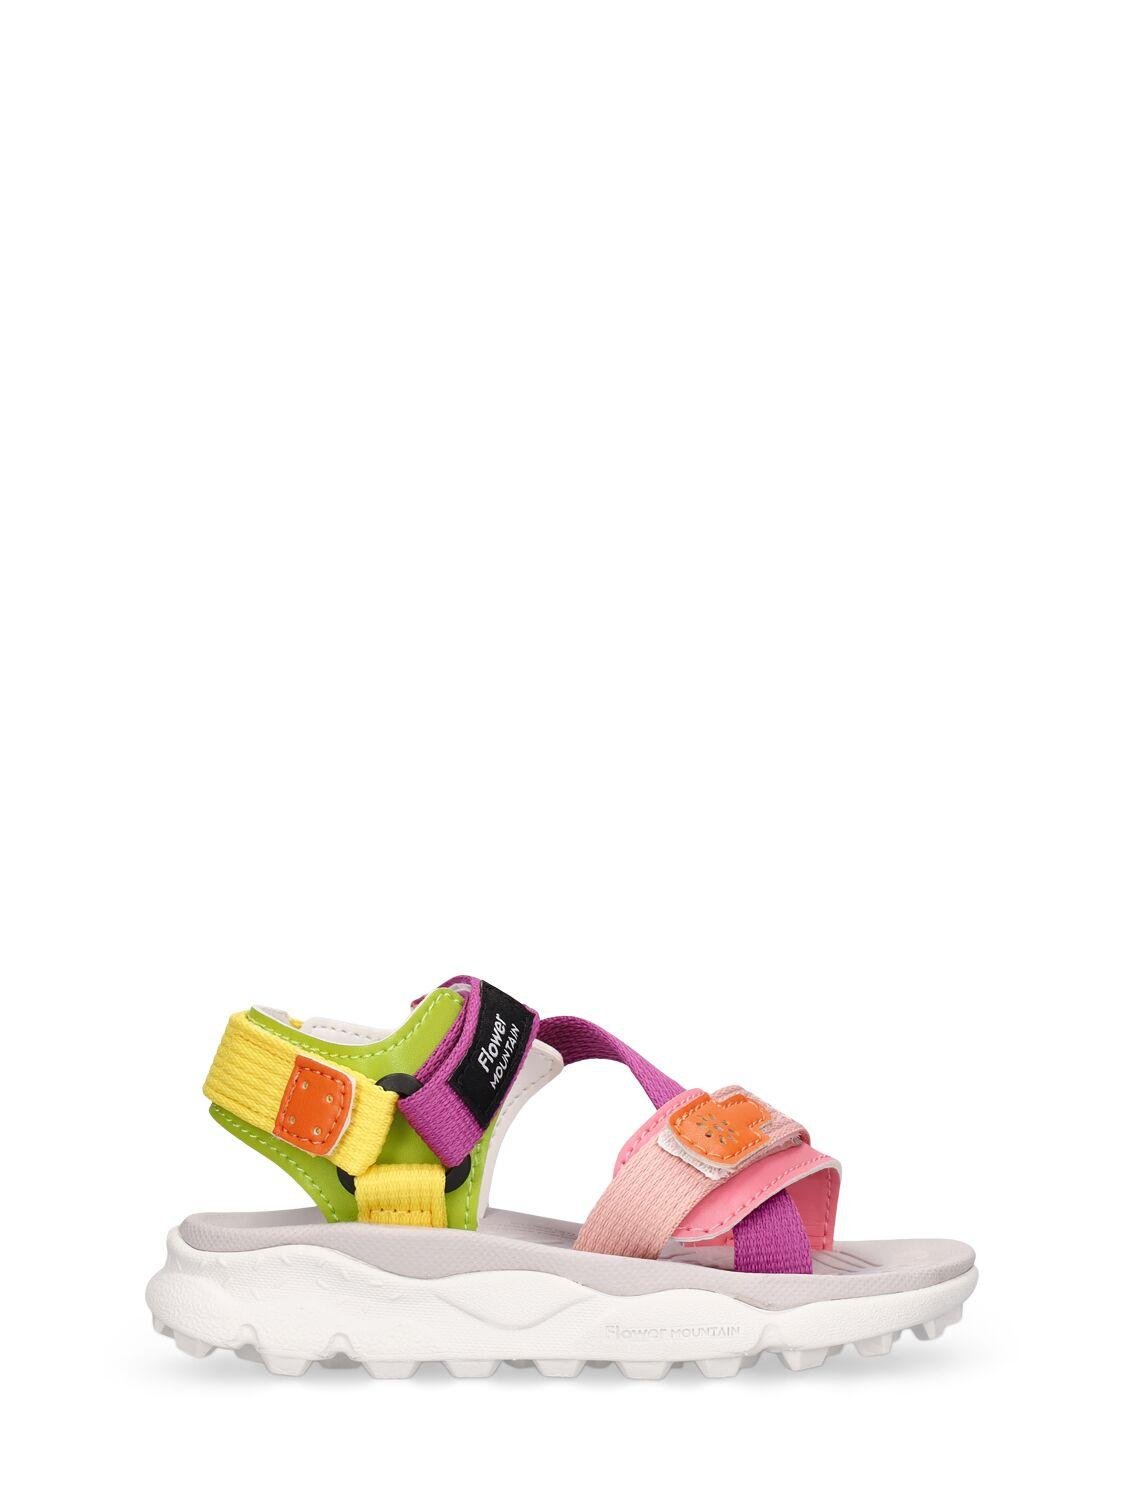 Strap Sandals by FLOWER MOUNTAIN